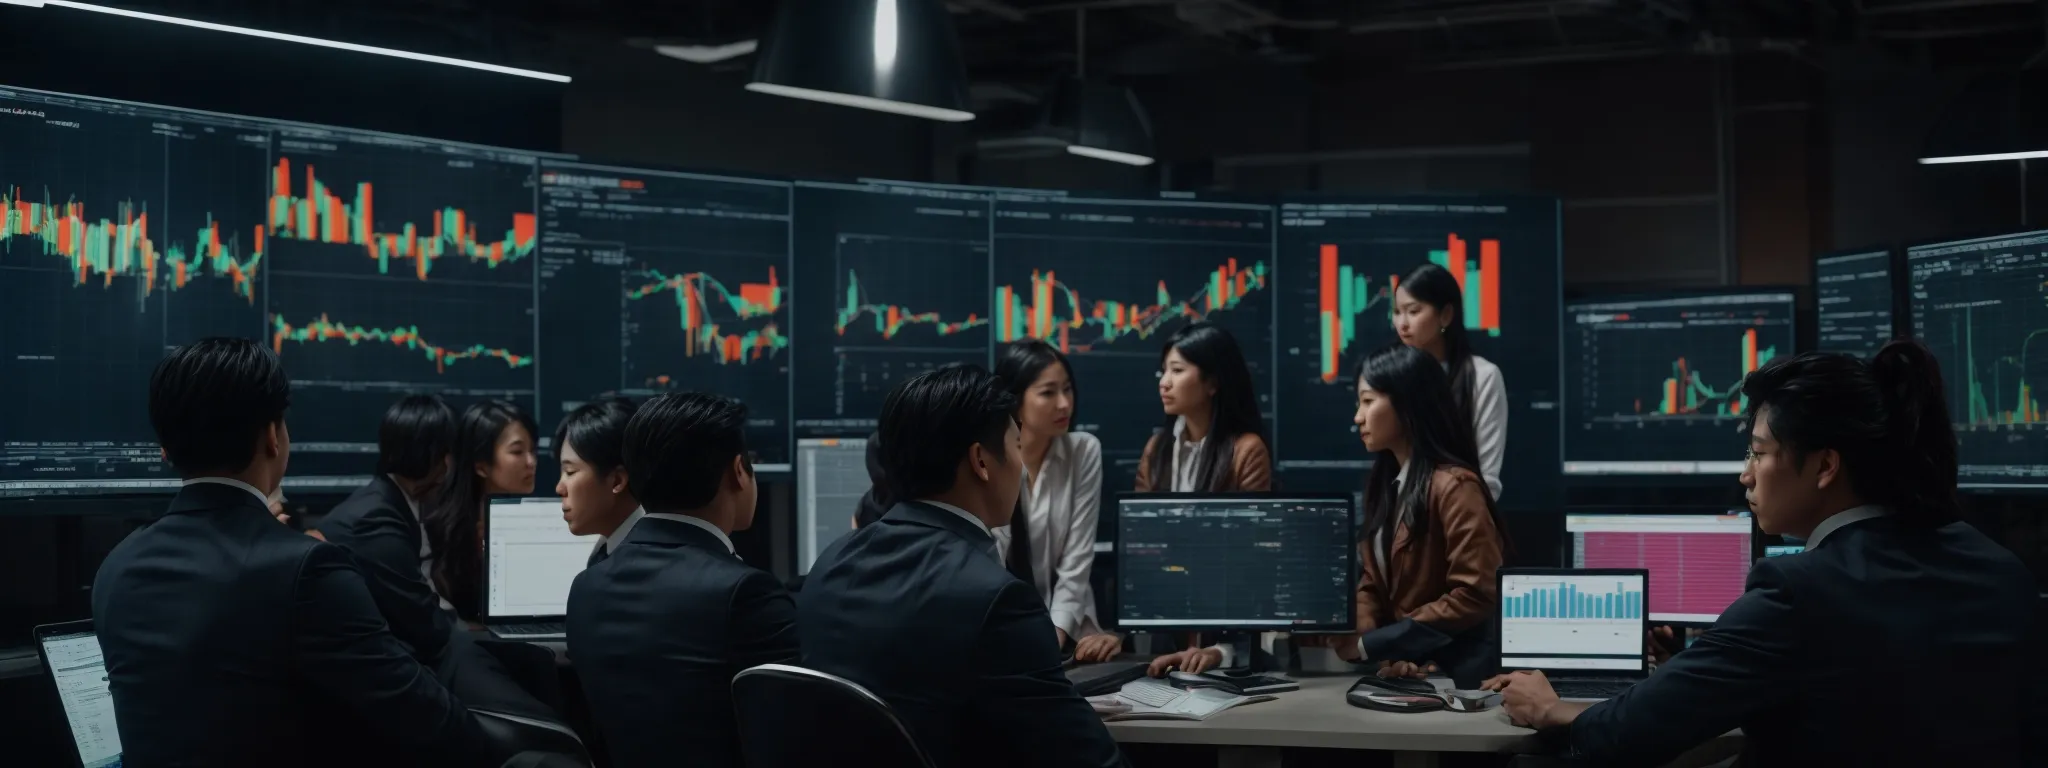 a group of marketers gathered around a large screen displaying colorful charts and profiles, deeply engrossed in analyzing data.